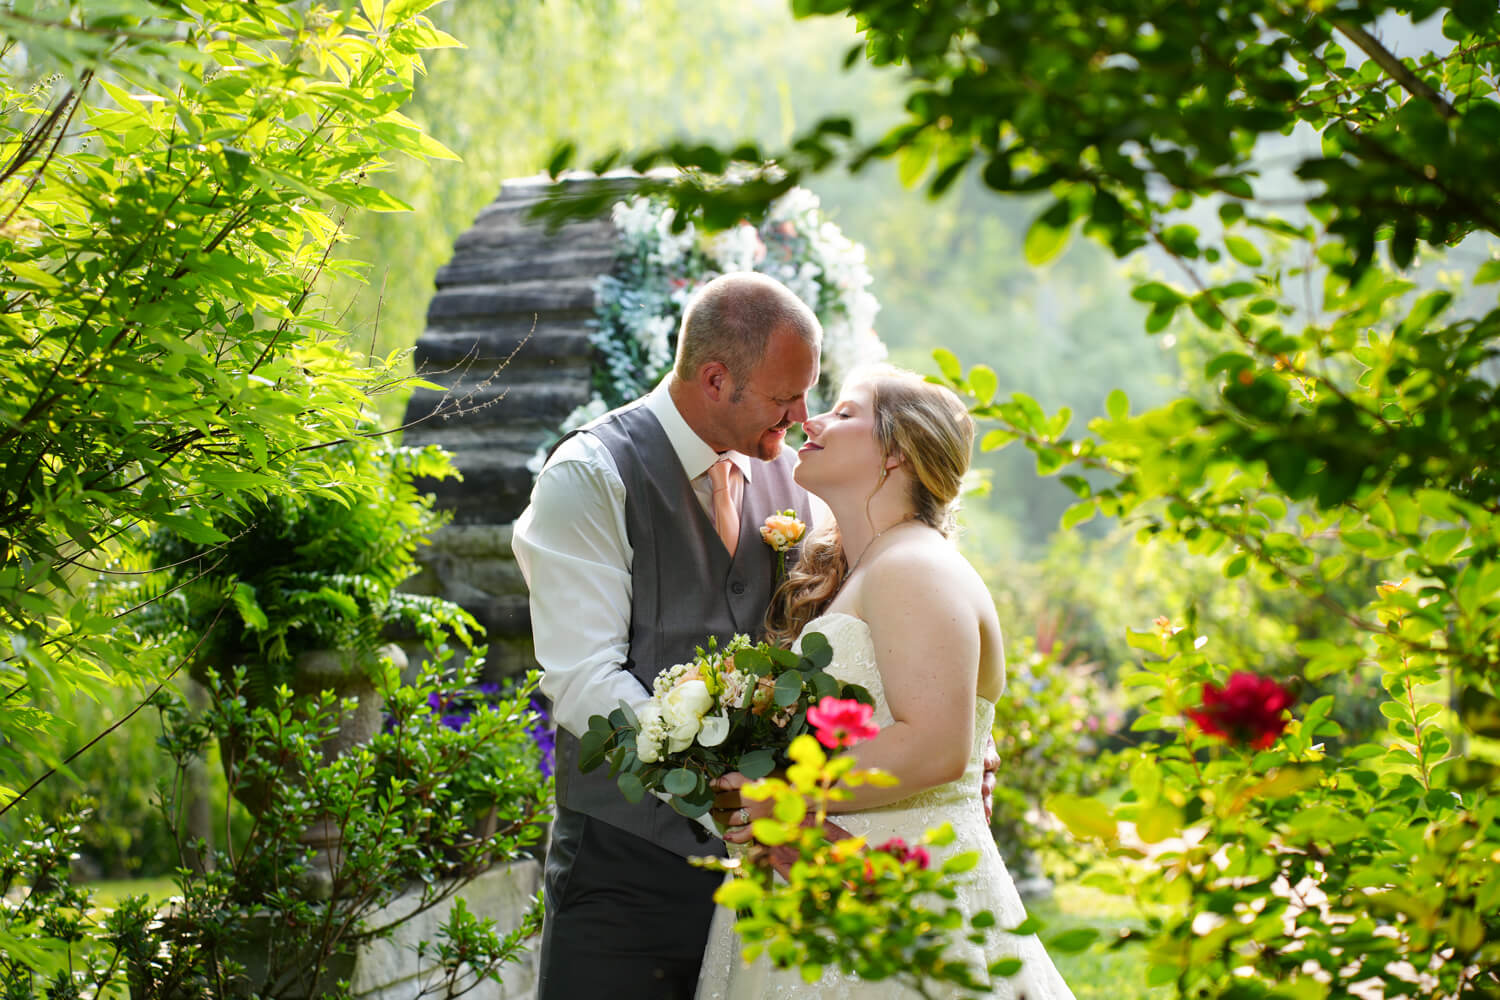 Wedding couple embracing in a kiss in a rose garden with a stone arch behind them at Honeysuckle Hills in Pigeon Forge TN